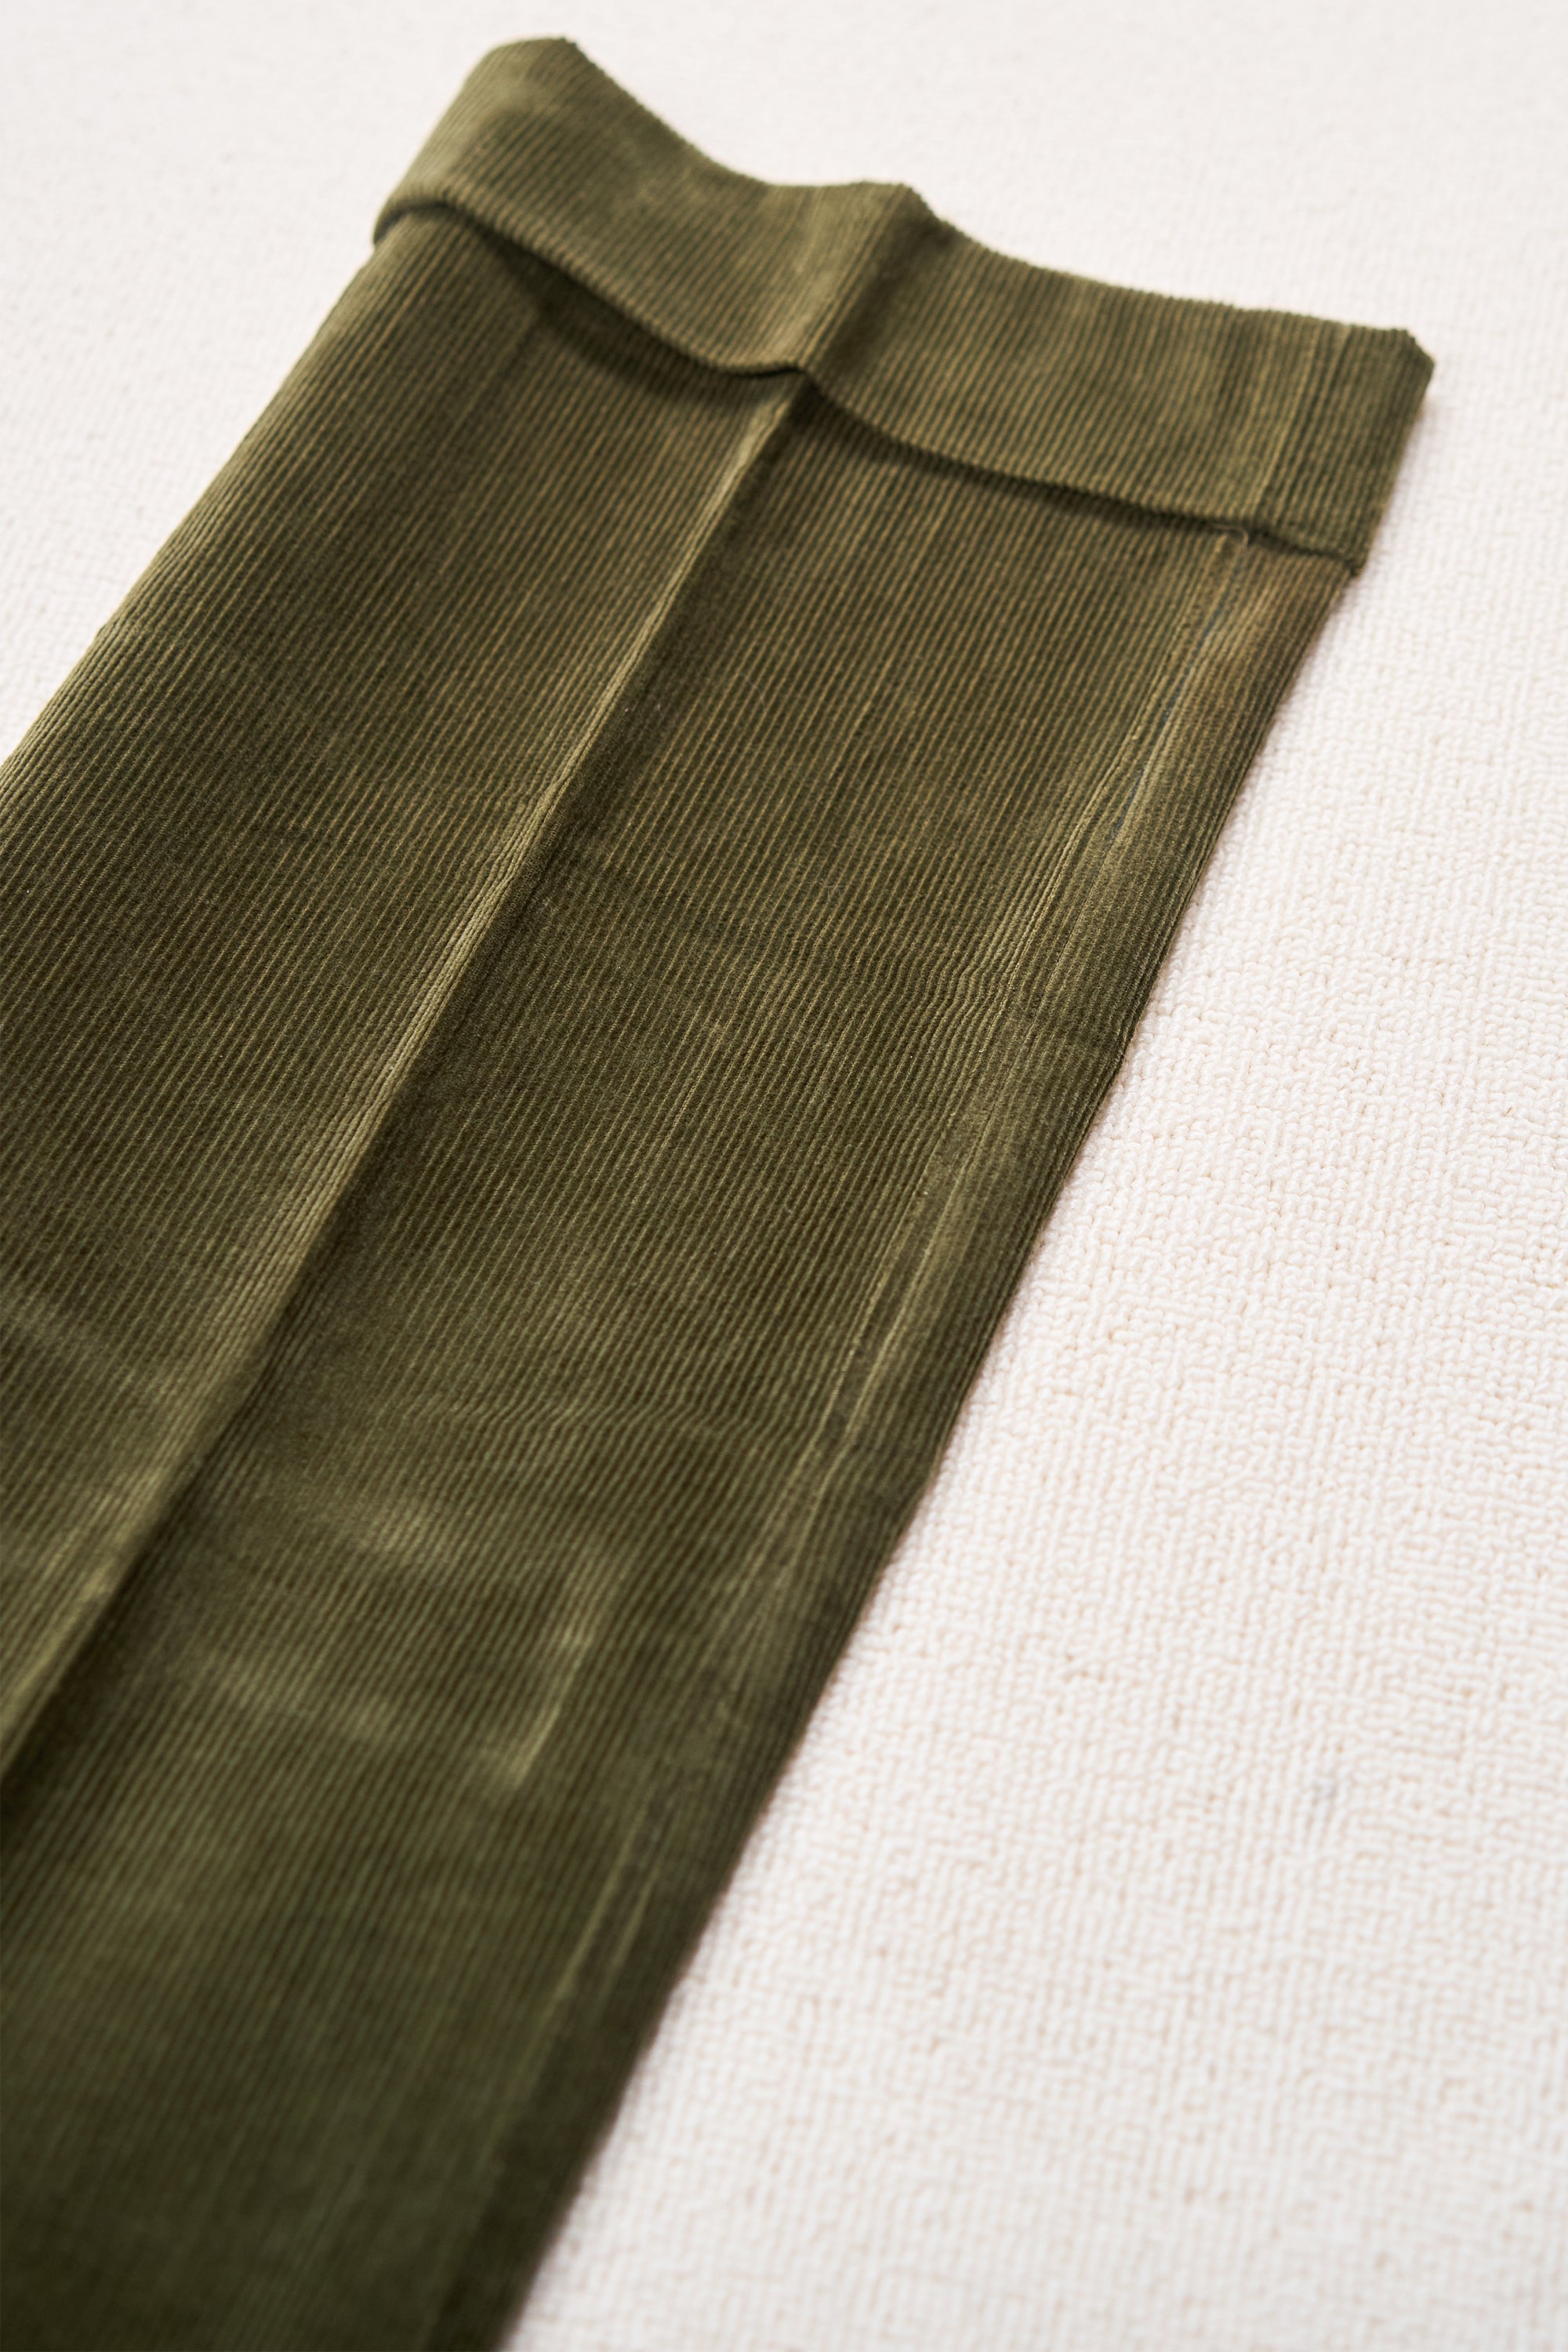 Ring Jacket Olive Cotton Corduroy Trousers